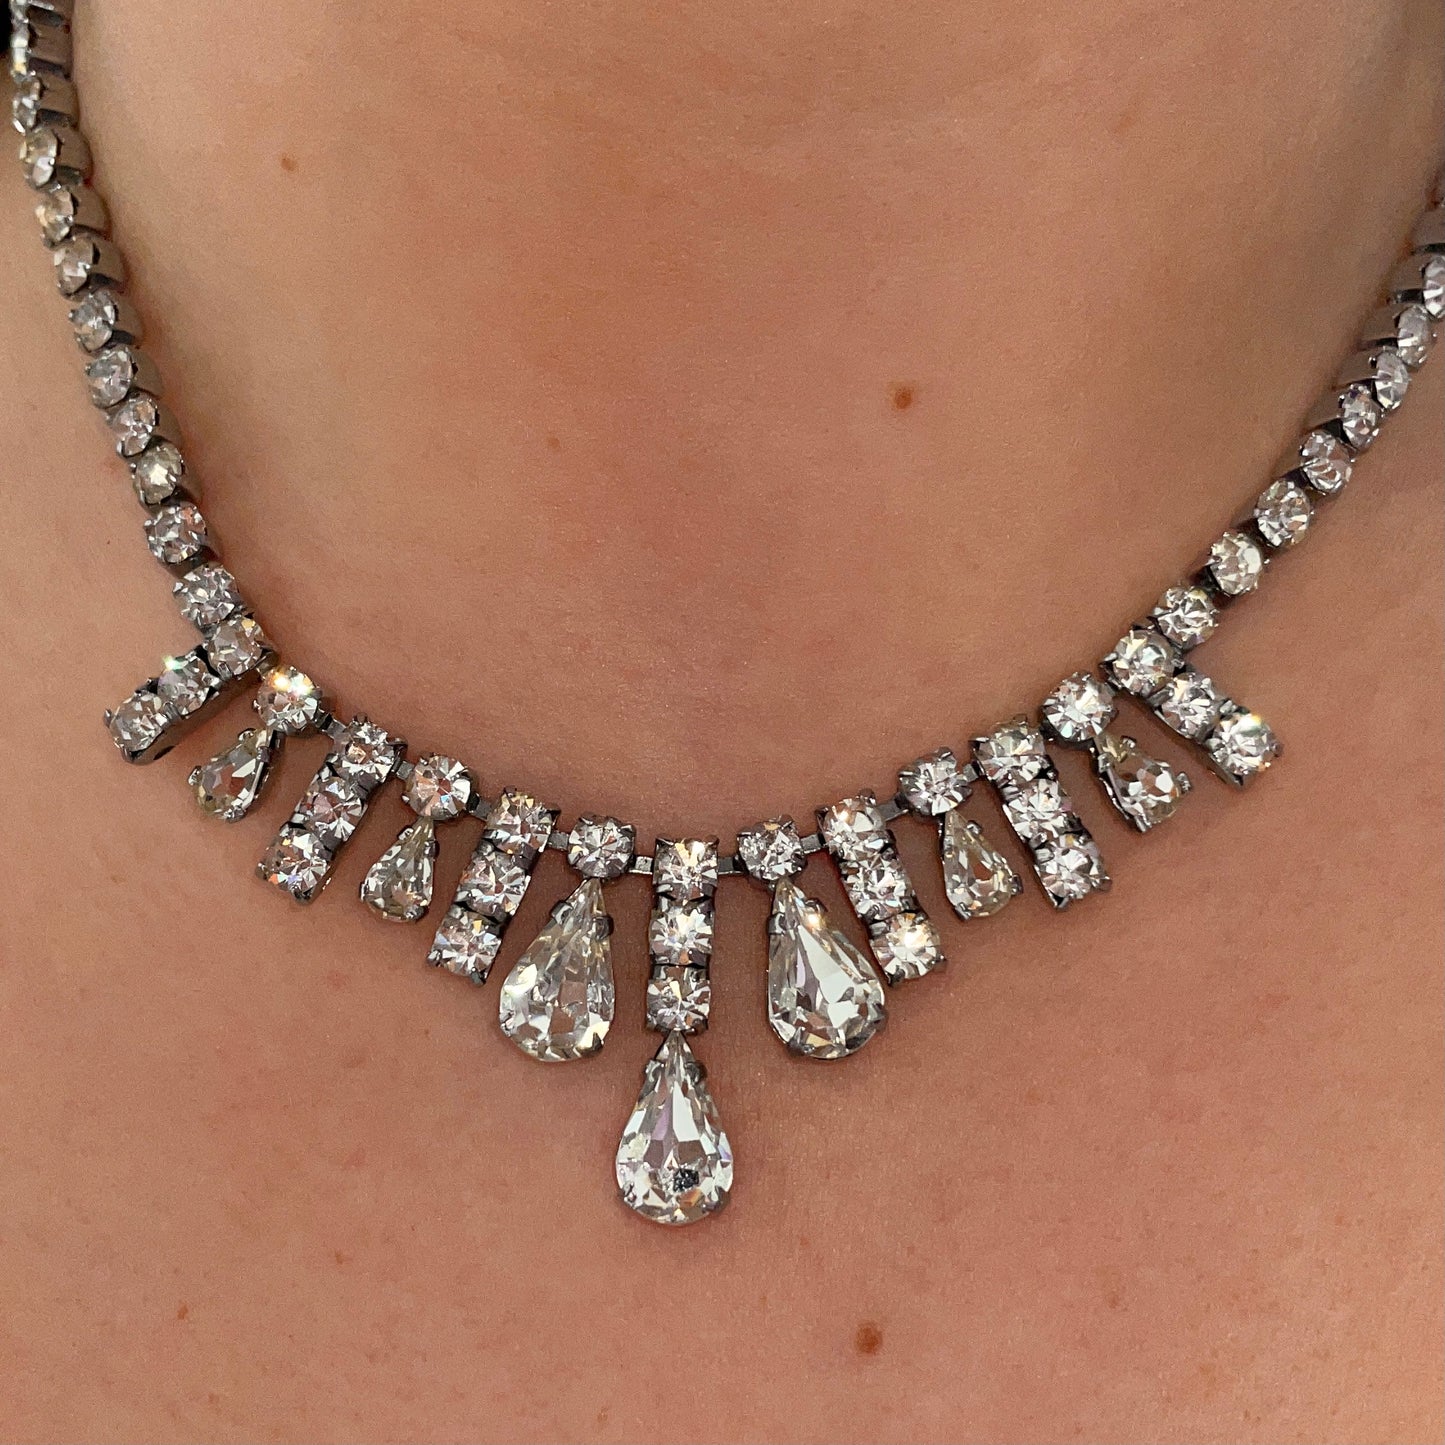 1980s Sparkly Silver Bling Necklace